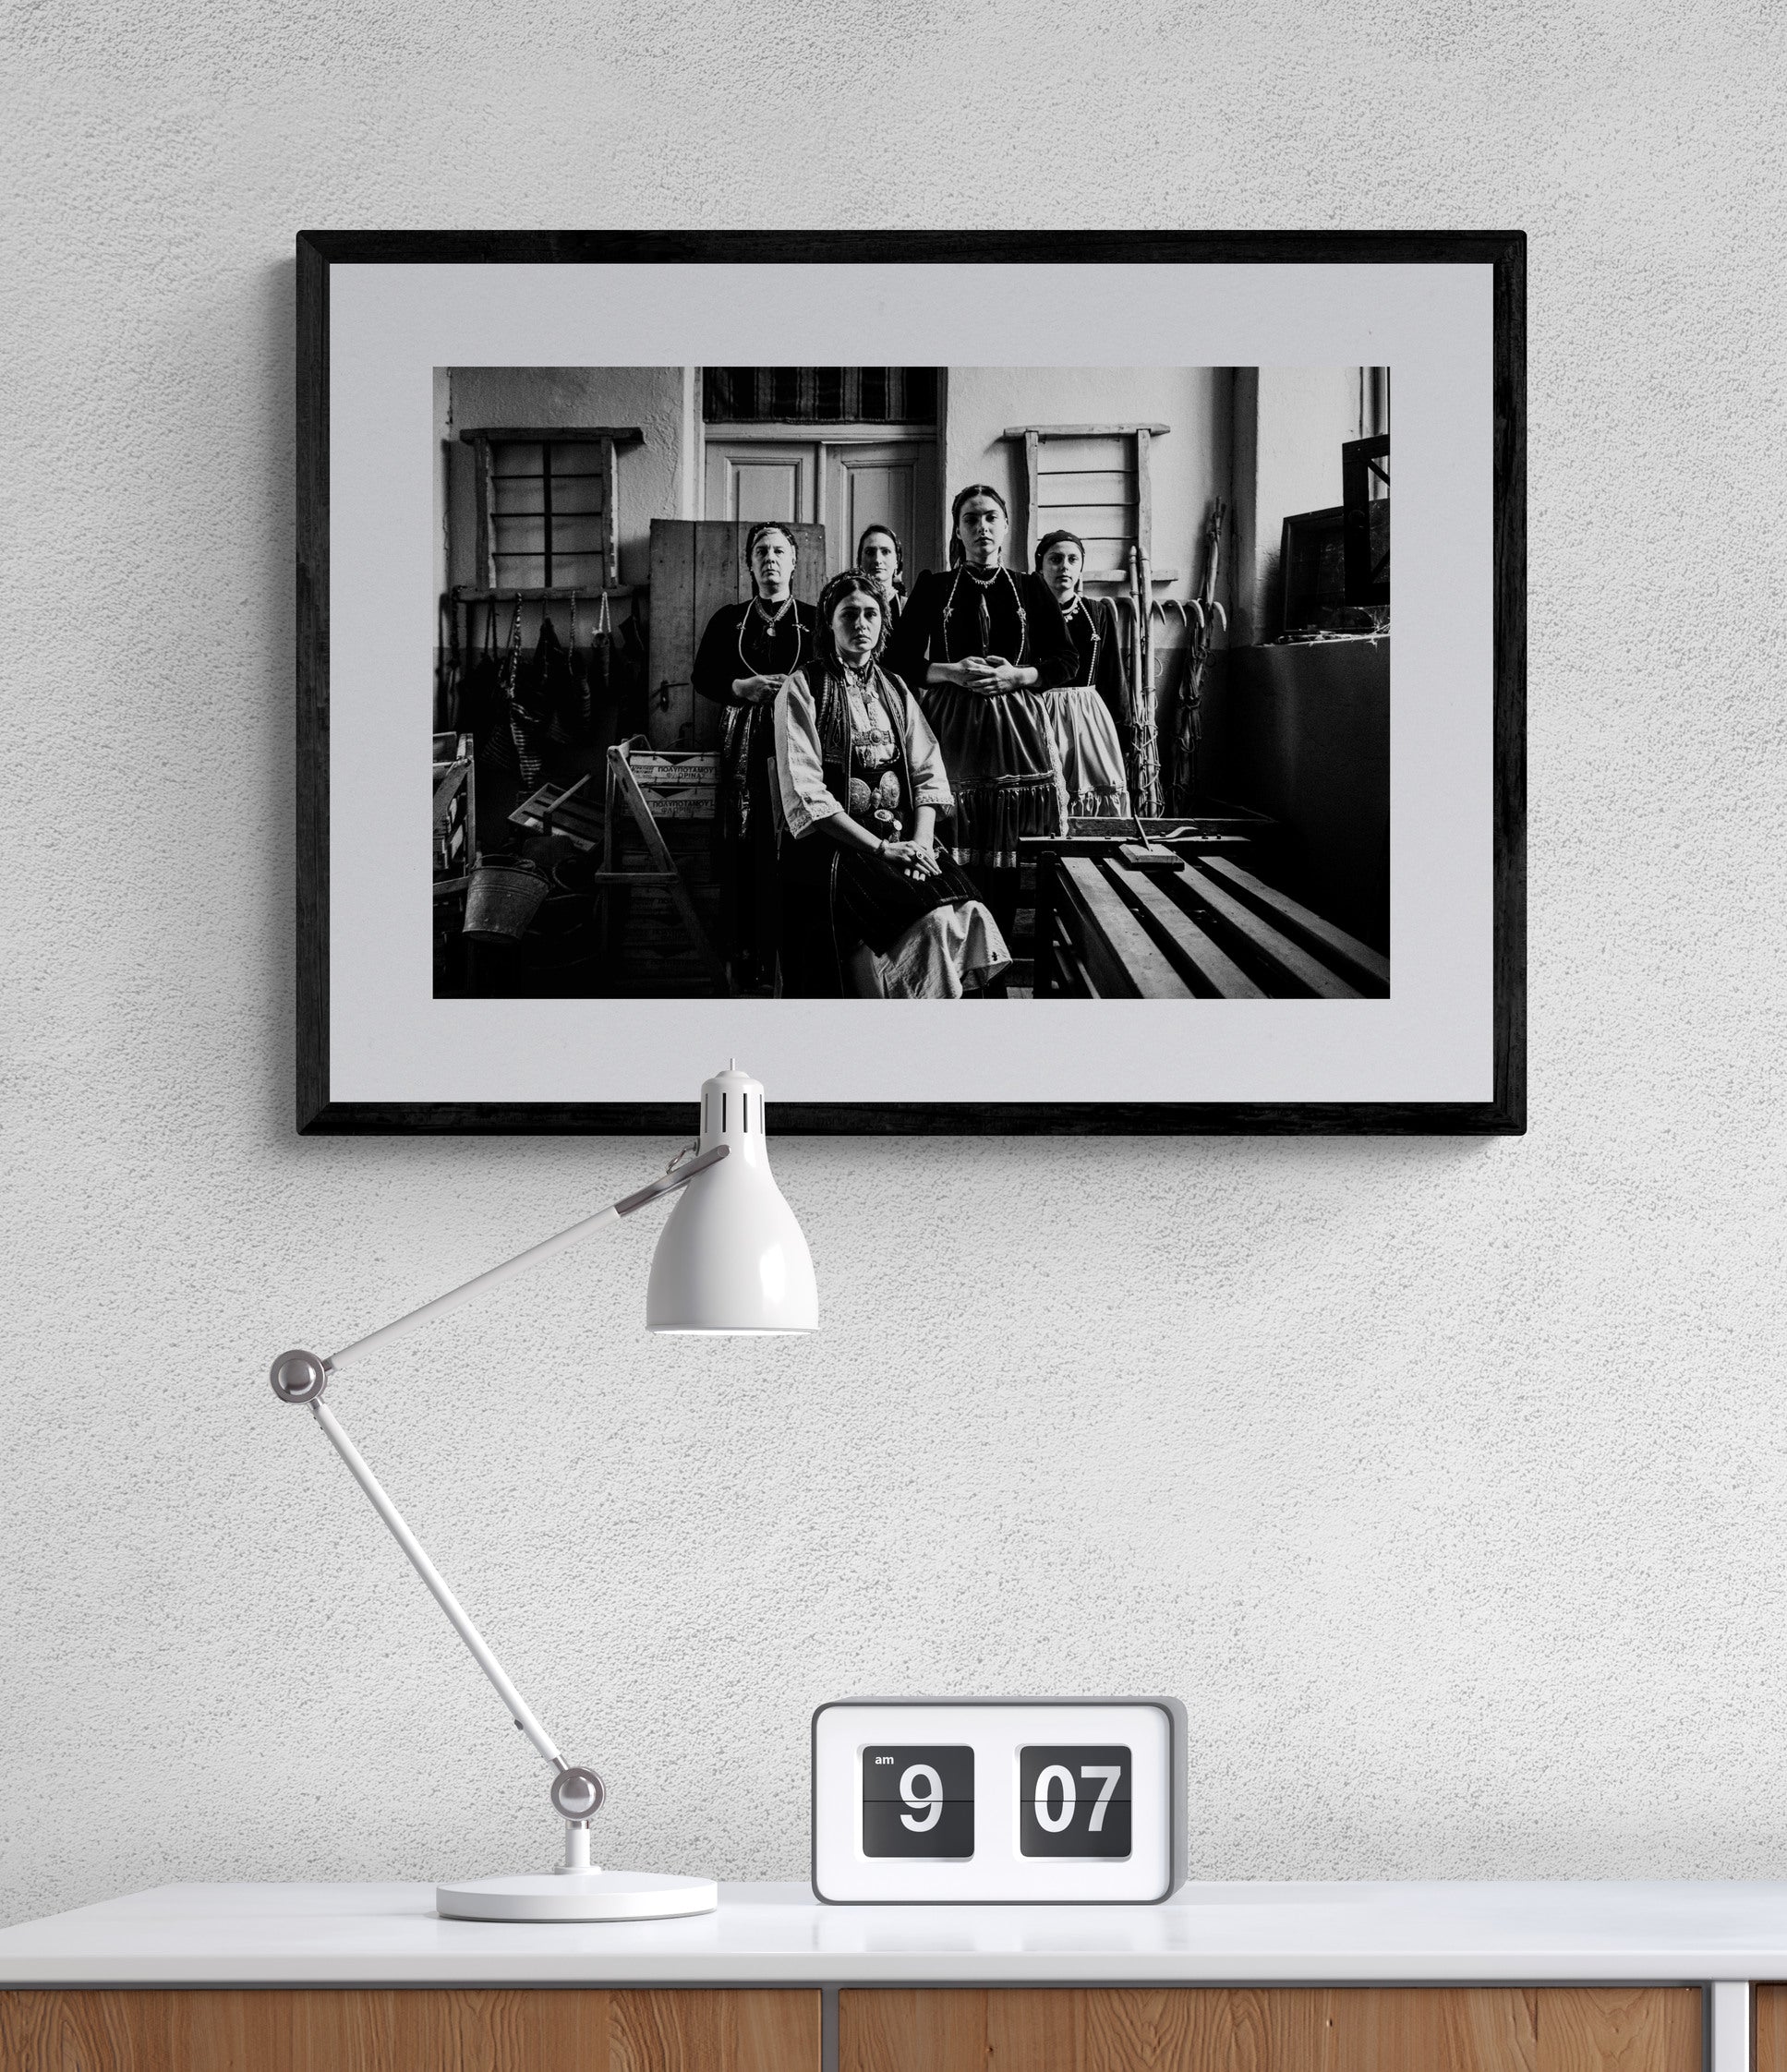 Black and White Photography Wall Art Greece | Costumes of Polypotamos at the local Museum Florina W. Macedonia by George Tatakis - single framed photo